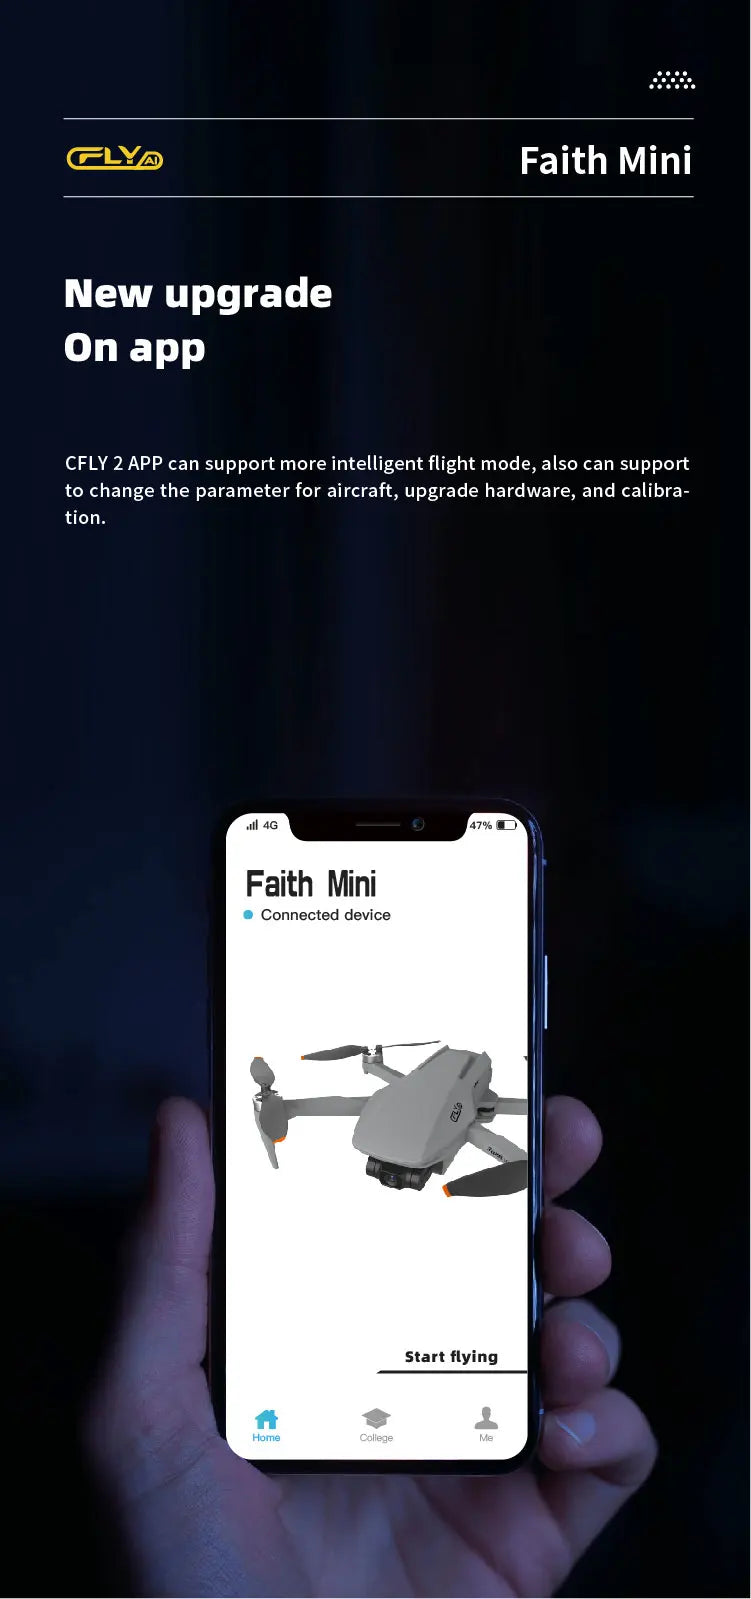 CFLY Faith MINI Drone, CFLY 2 APP can support to change the parameter for aircraft, upgrade hardware, and